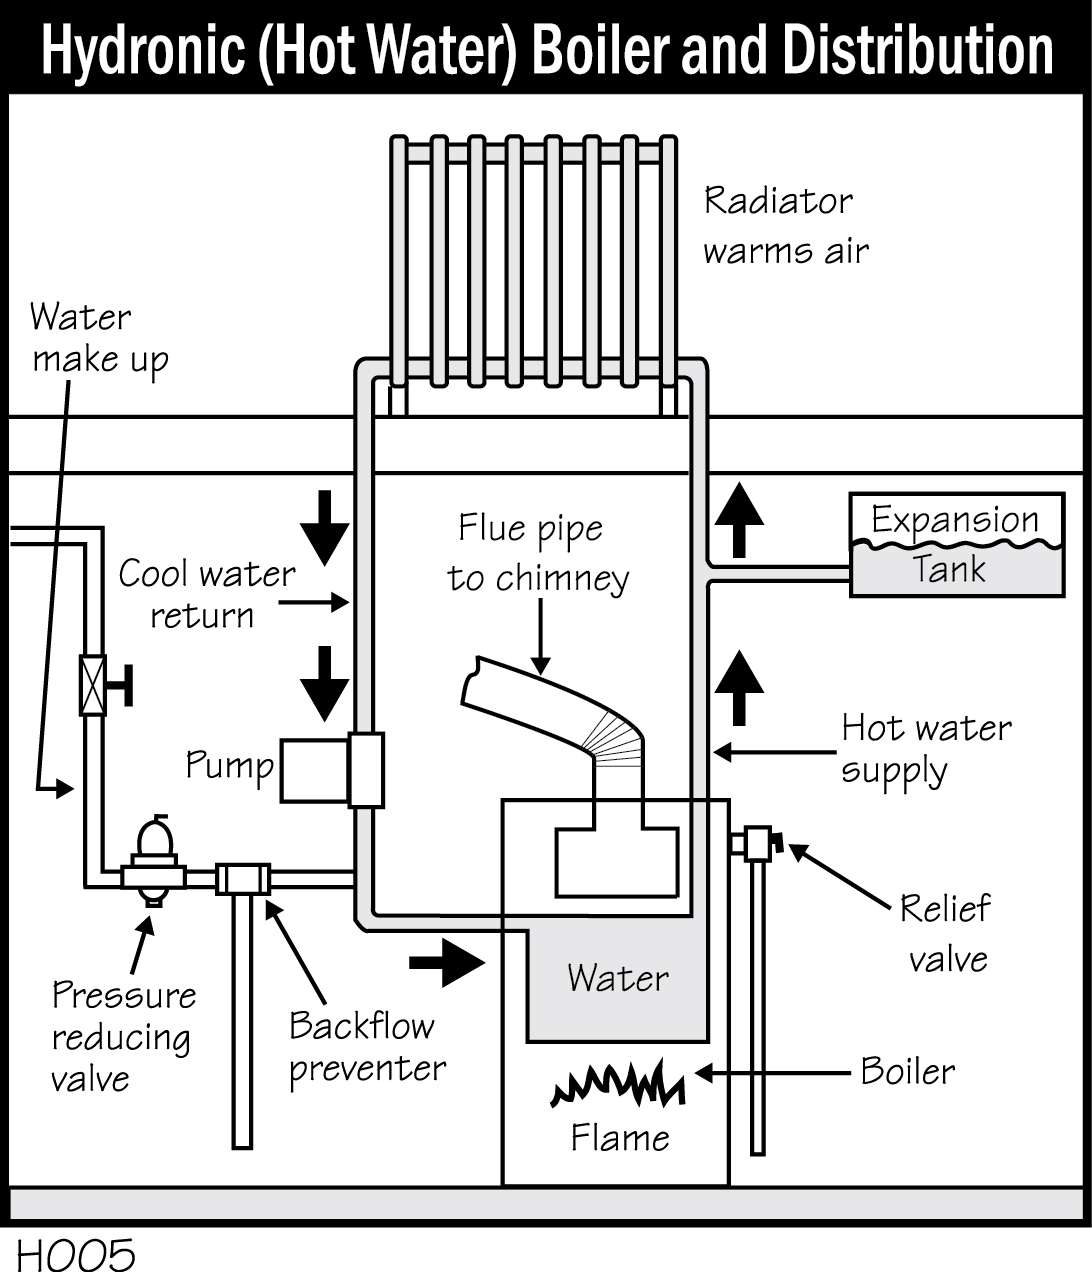 H005 - Hydronic (Hot Water) Boiler and Distribution